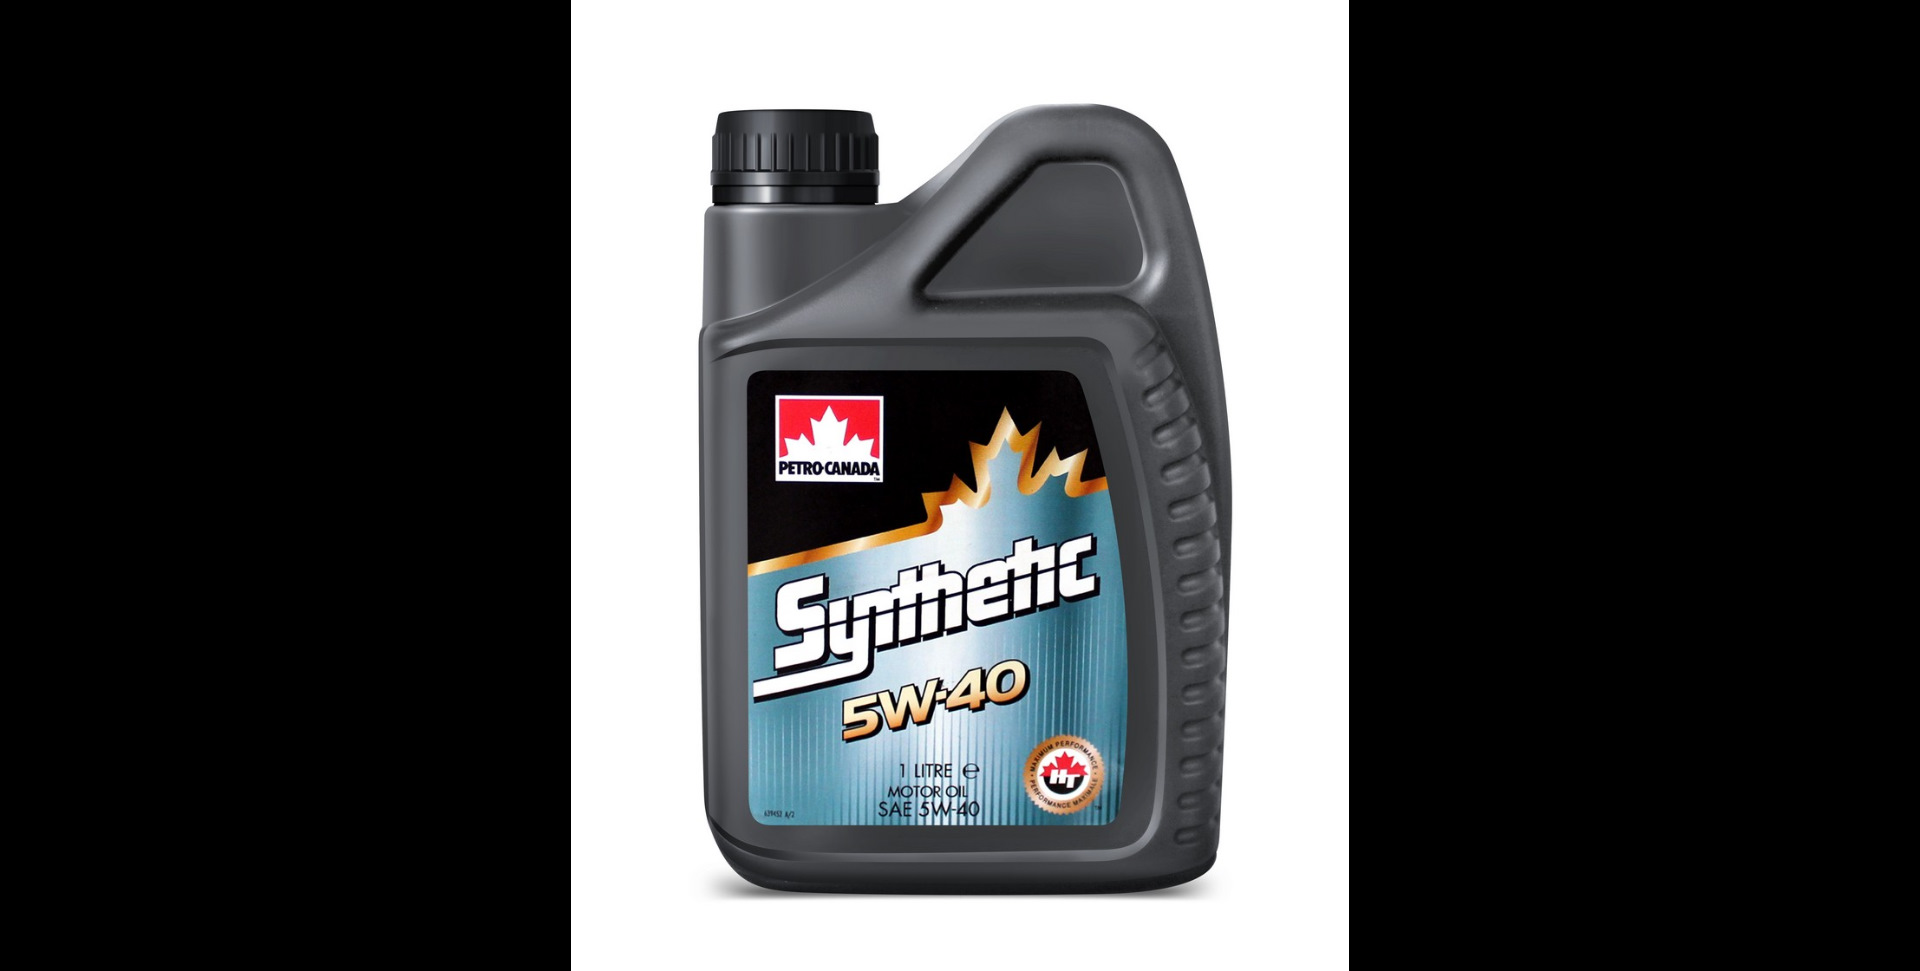 Sae 5 40. Petro Canada 5w40 c3. Petro Canada 5w40 c3-x. Petro-Canada Supreme c3-x Synthetic 5w-40. Petro-Canada Europe Synthetic 5w-40.